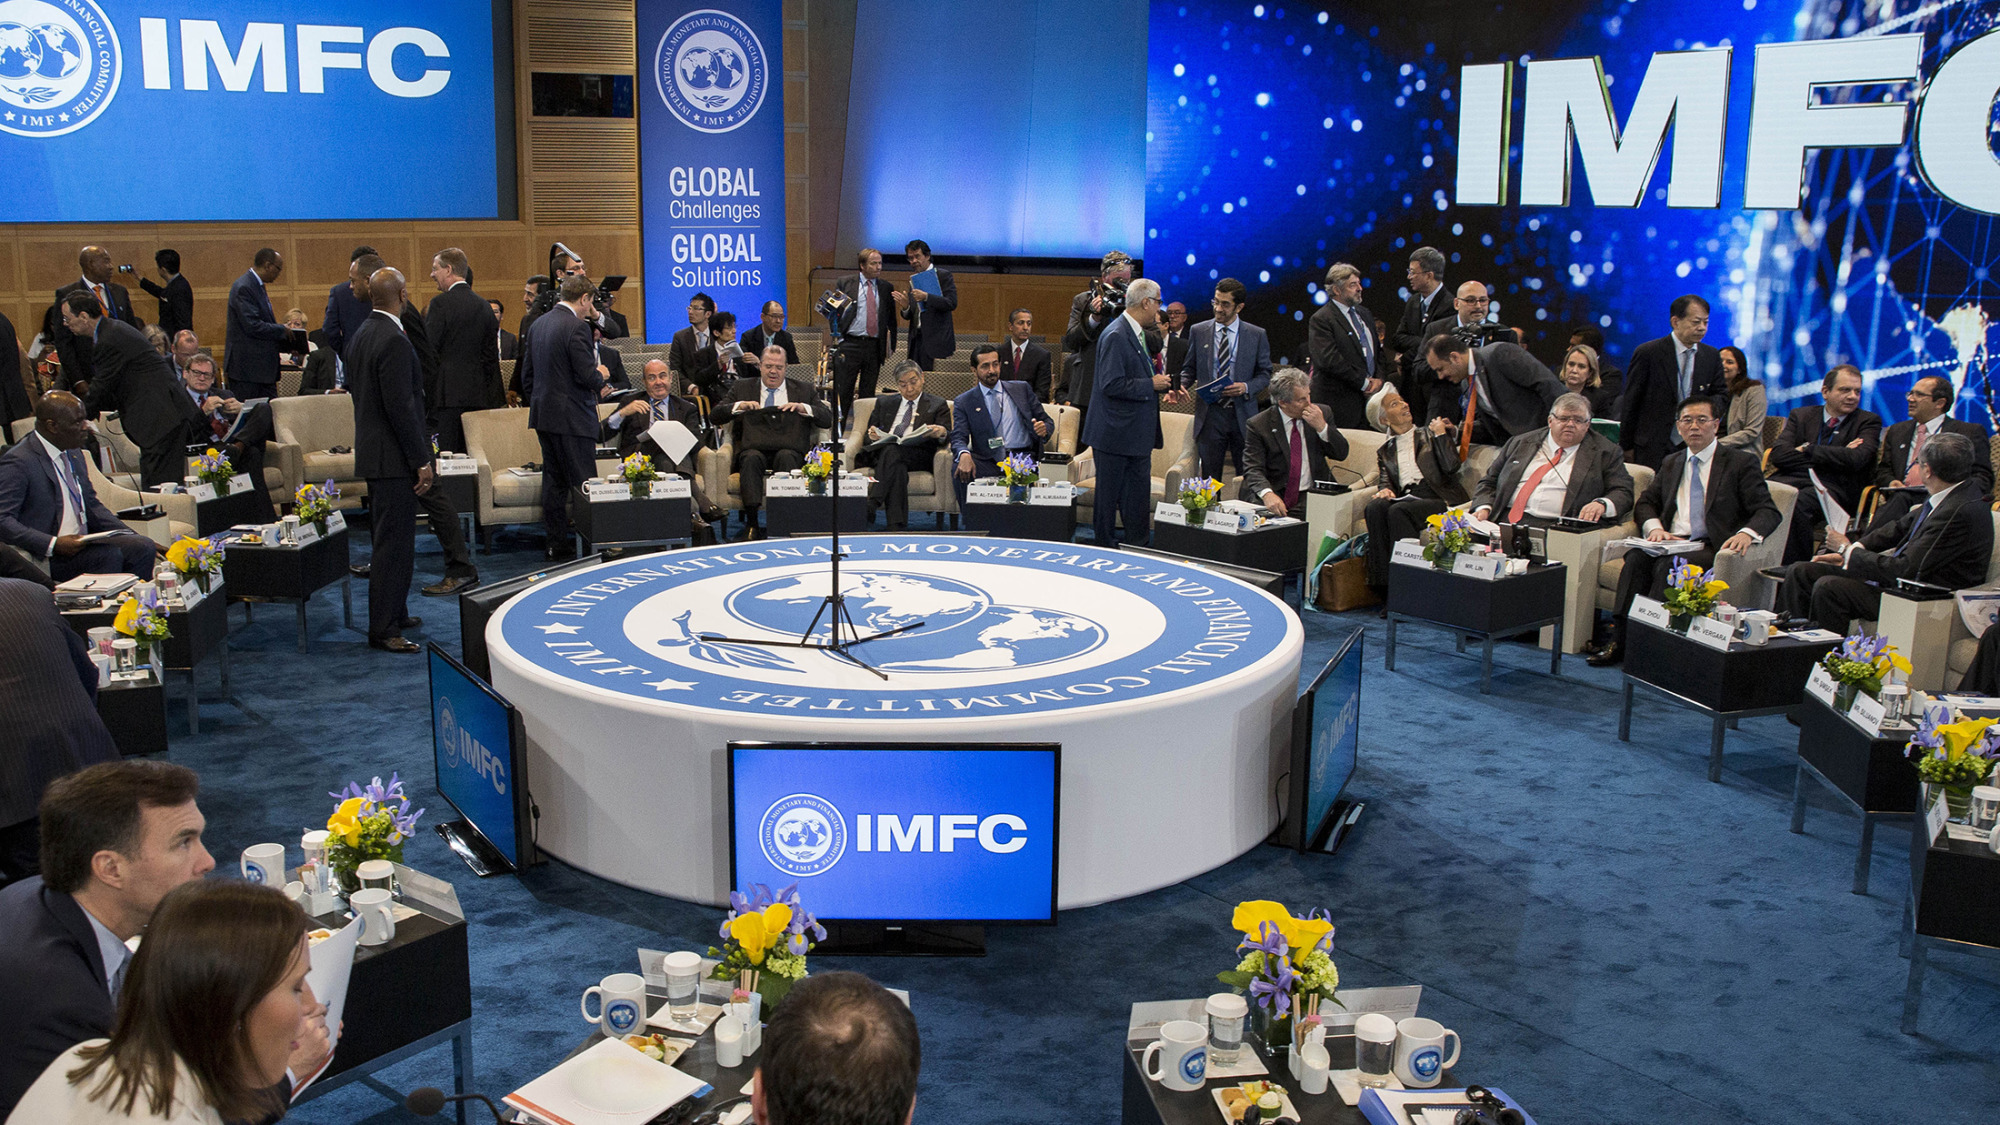 An overall view as participants attend the International Monetary Fund Committee (IMFC) plenary session during the spring meetings of the International Monetary Fund (IMF) and World Bank in Washington, D.C., U.S., on Saturday, April 16, 2016. Group of 20 economies threatened yesterday to penalize tax havens that donÕt share information on their banking clients, after the leak of the Panama Papers provoked a global uproar over tax evasion.
